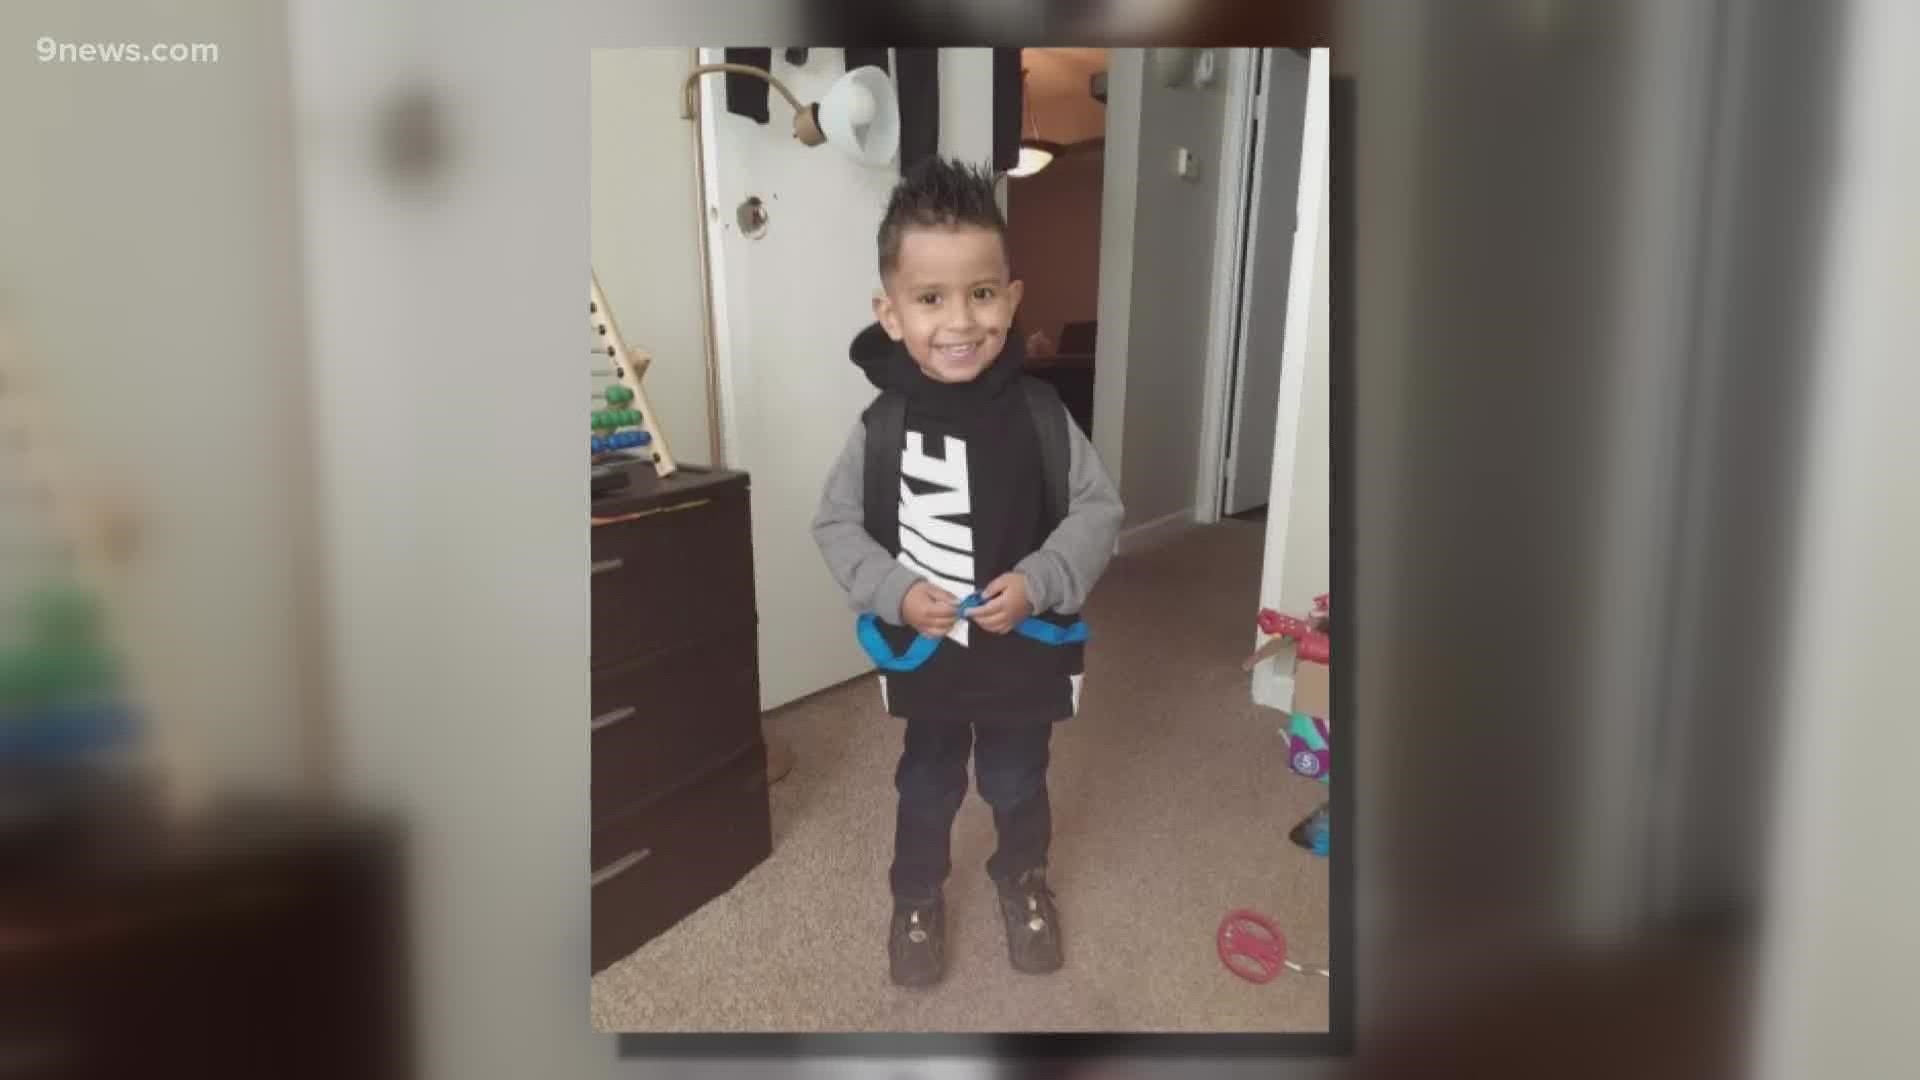 The woman accused of setting a fire that killed a 5-year-old is facing 34 counts. The boy's family says it was painful having to look at his accused killer in court.